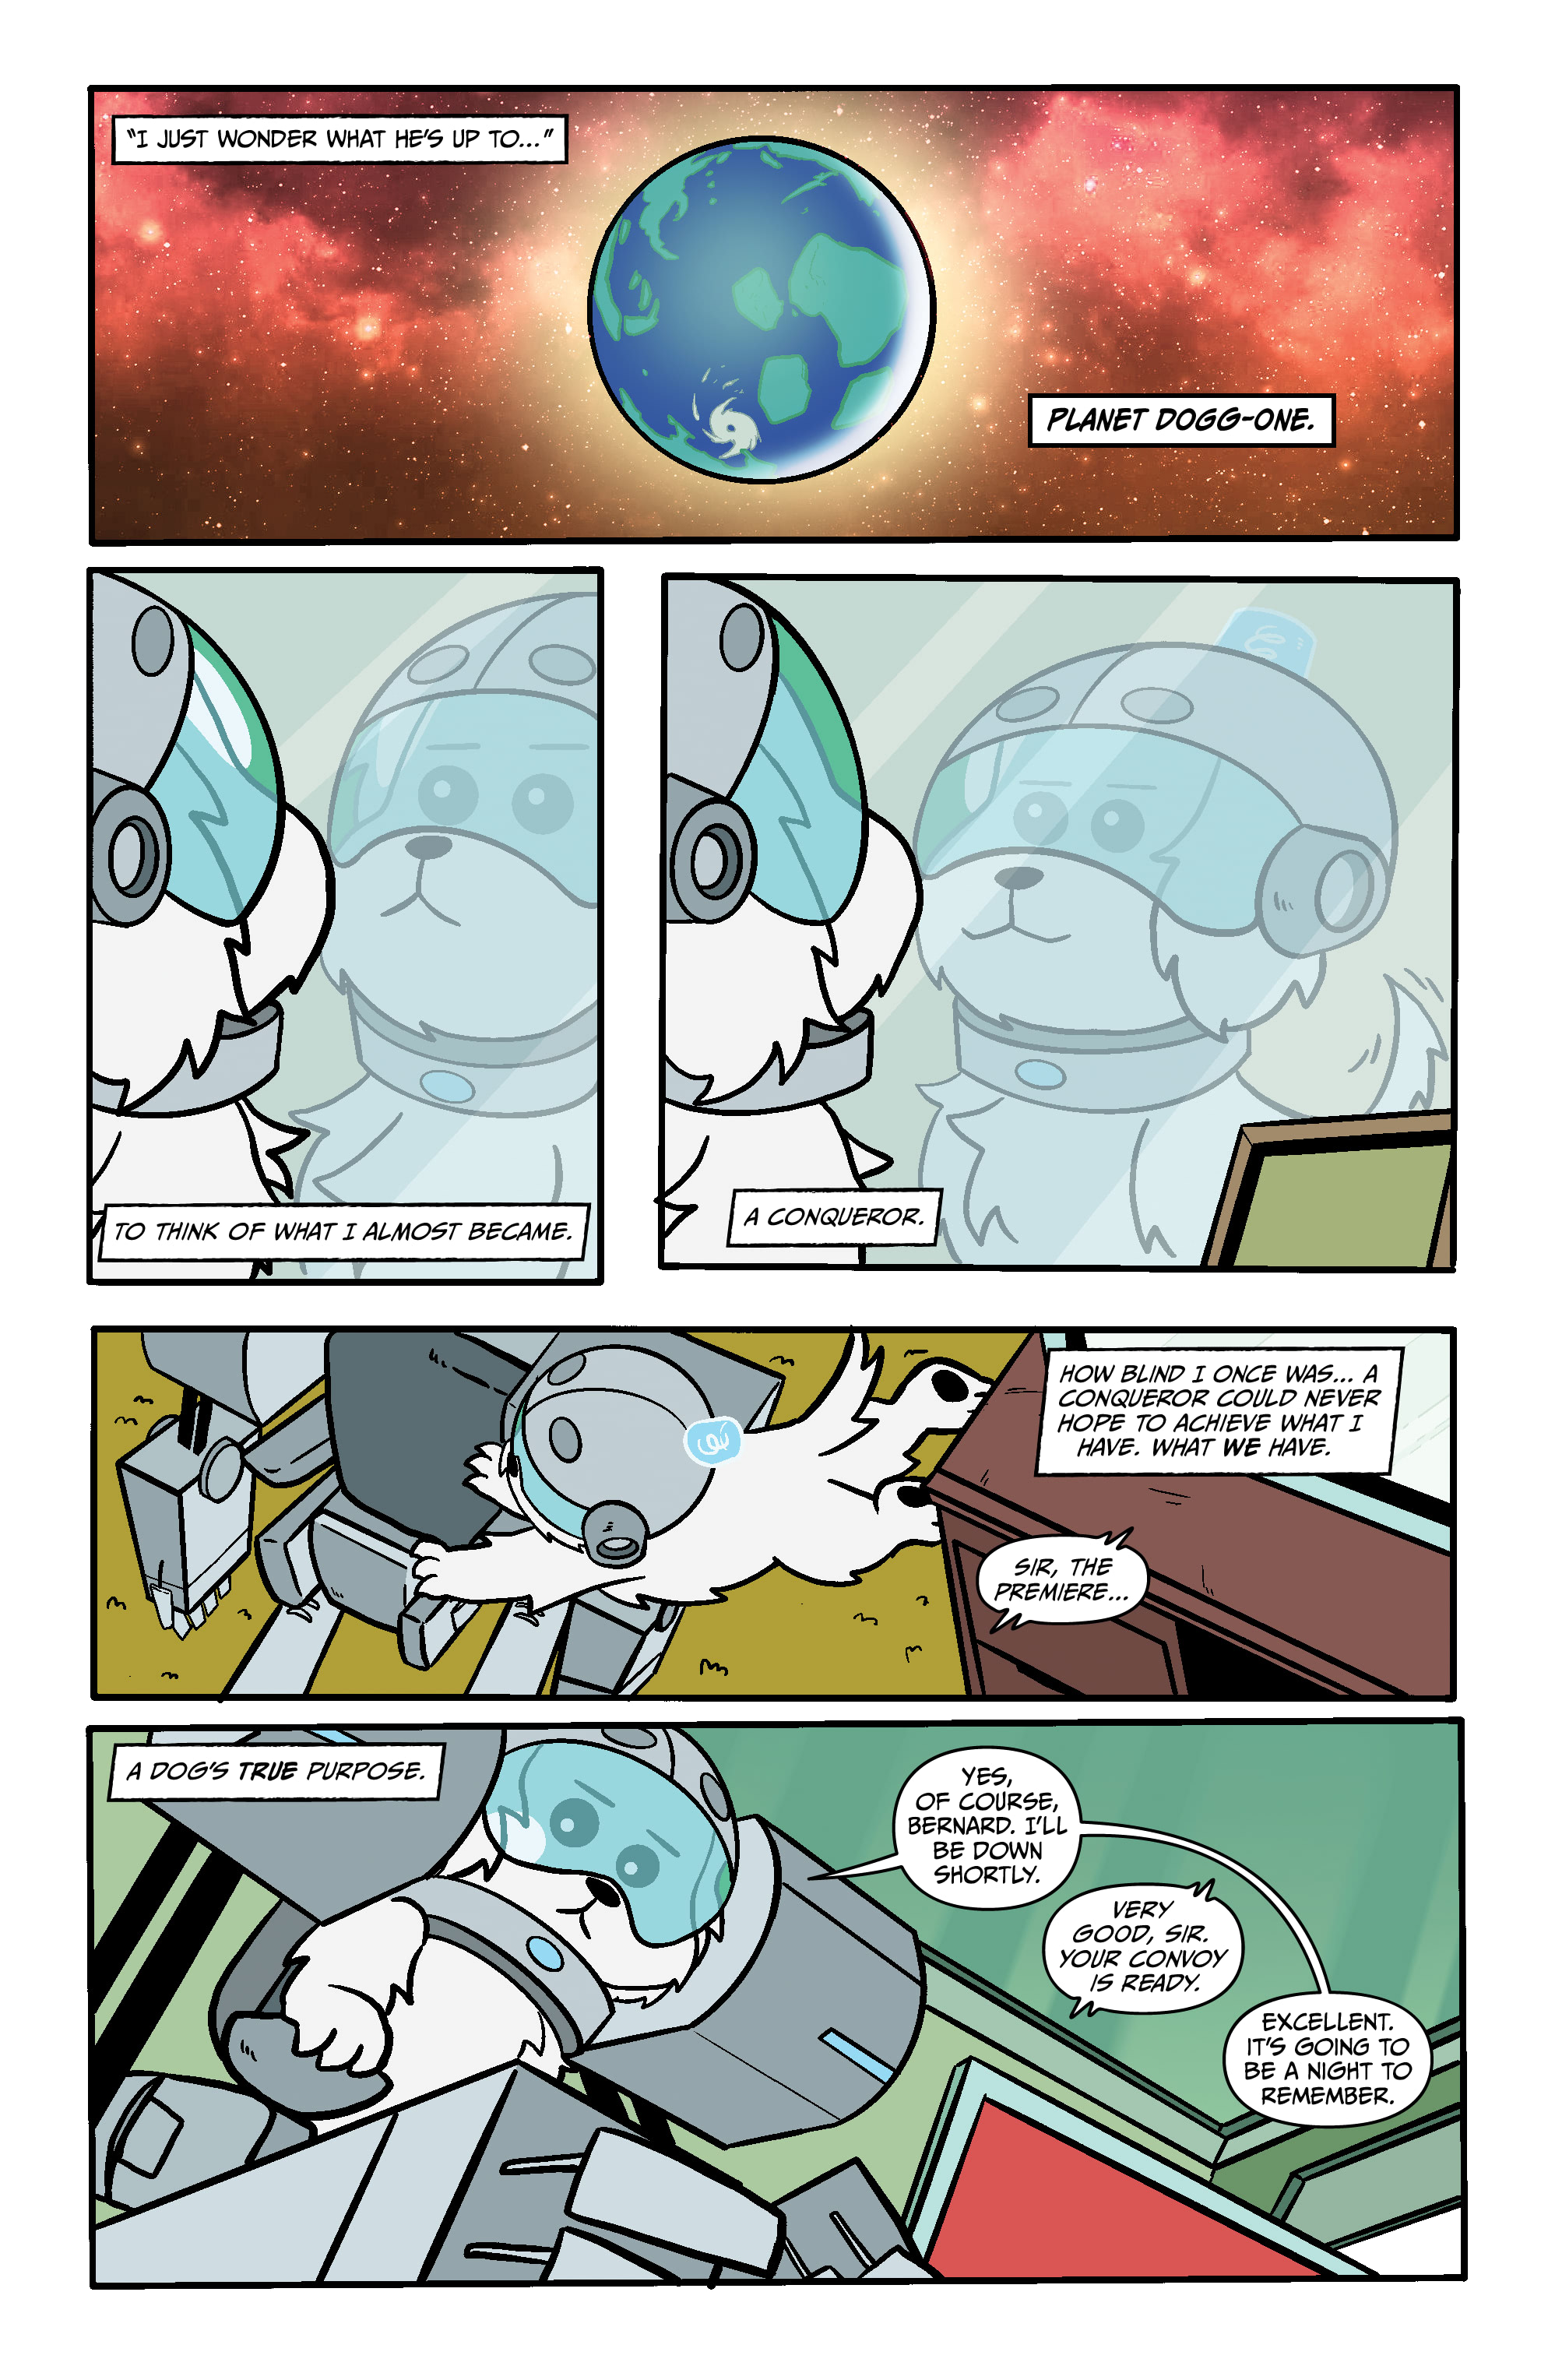 Rick and Morty Presents: Snuffles Goes to War (2021): Chapter 1 - Page 4